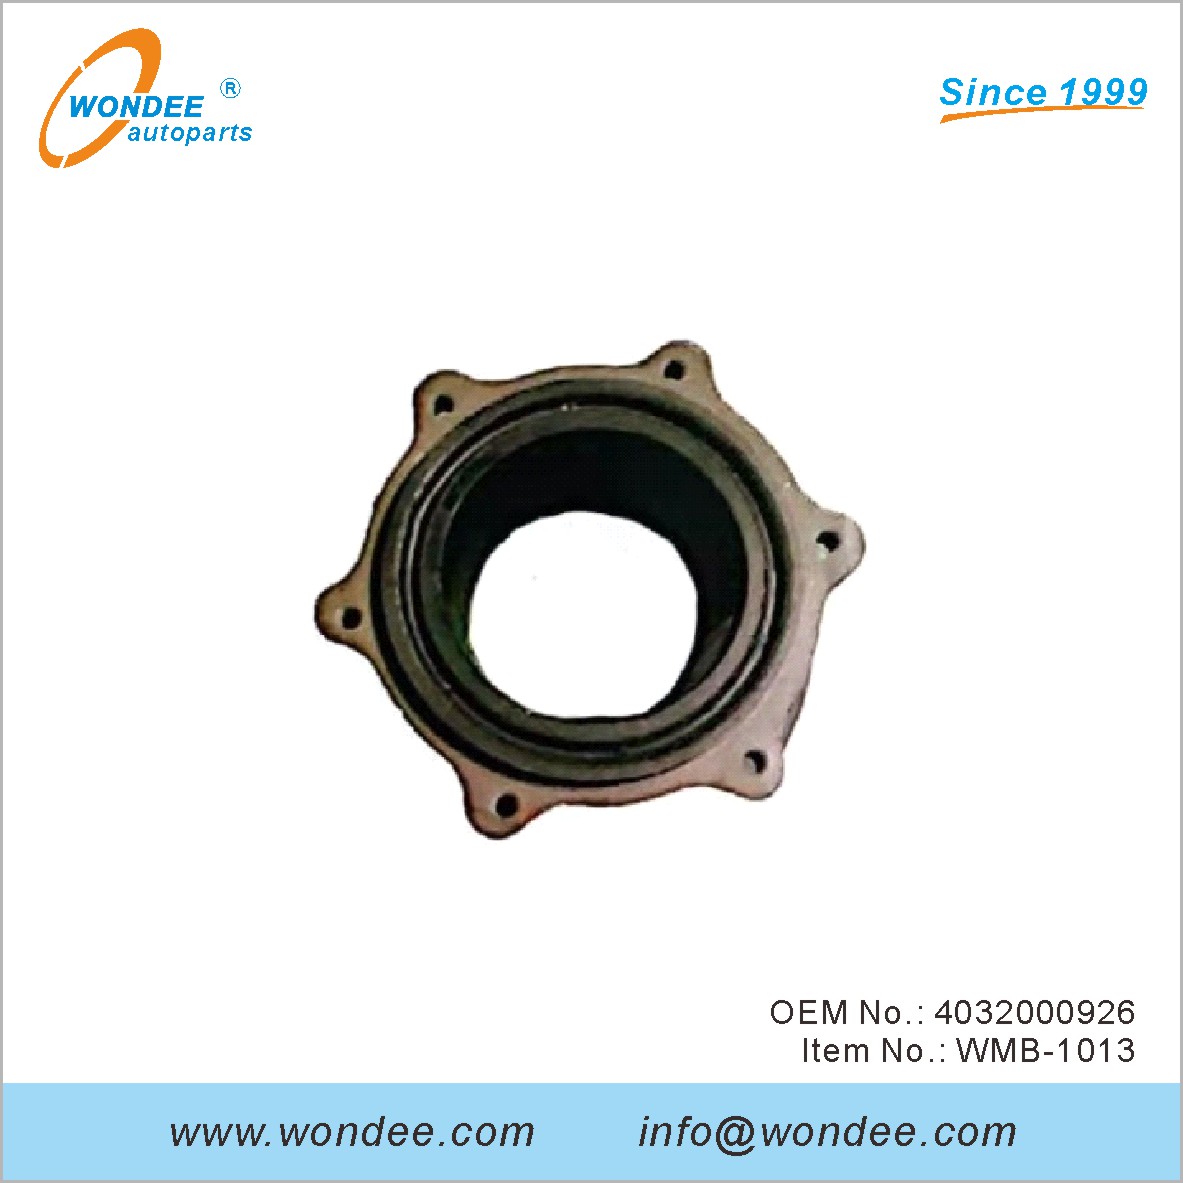 OEM 4032000926 for Benz from WONDEE